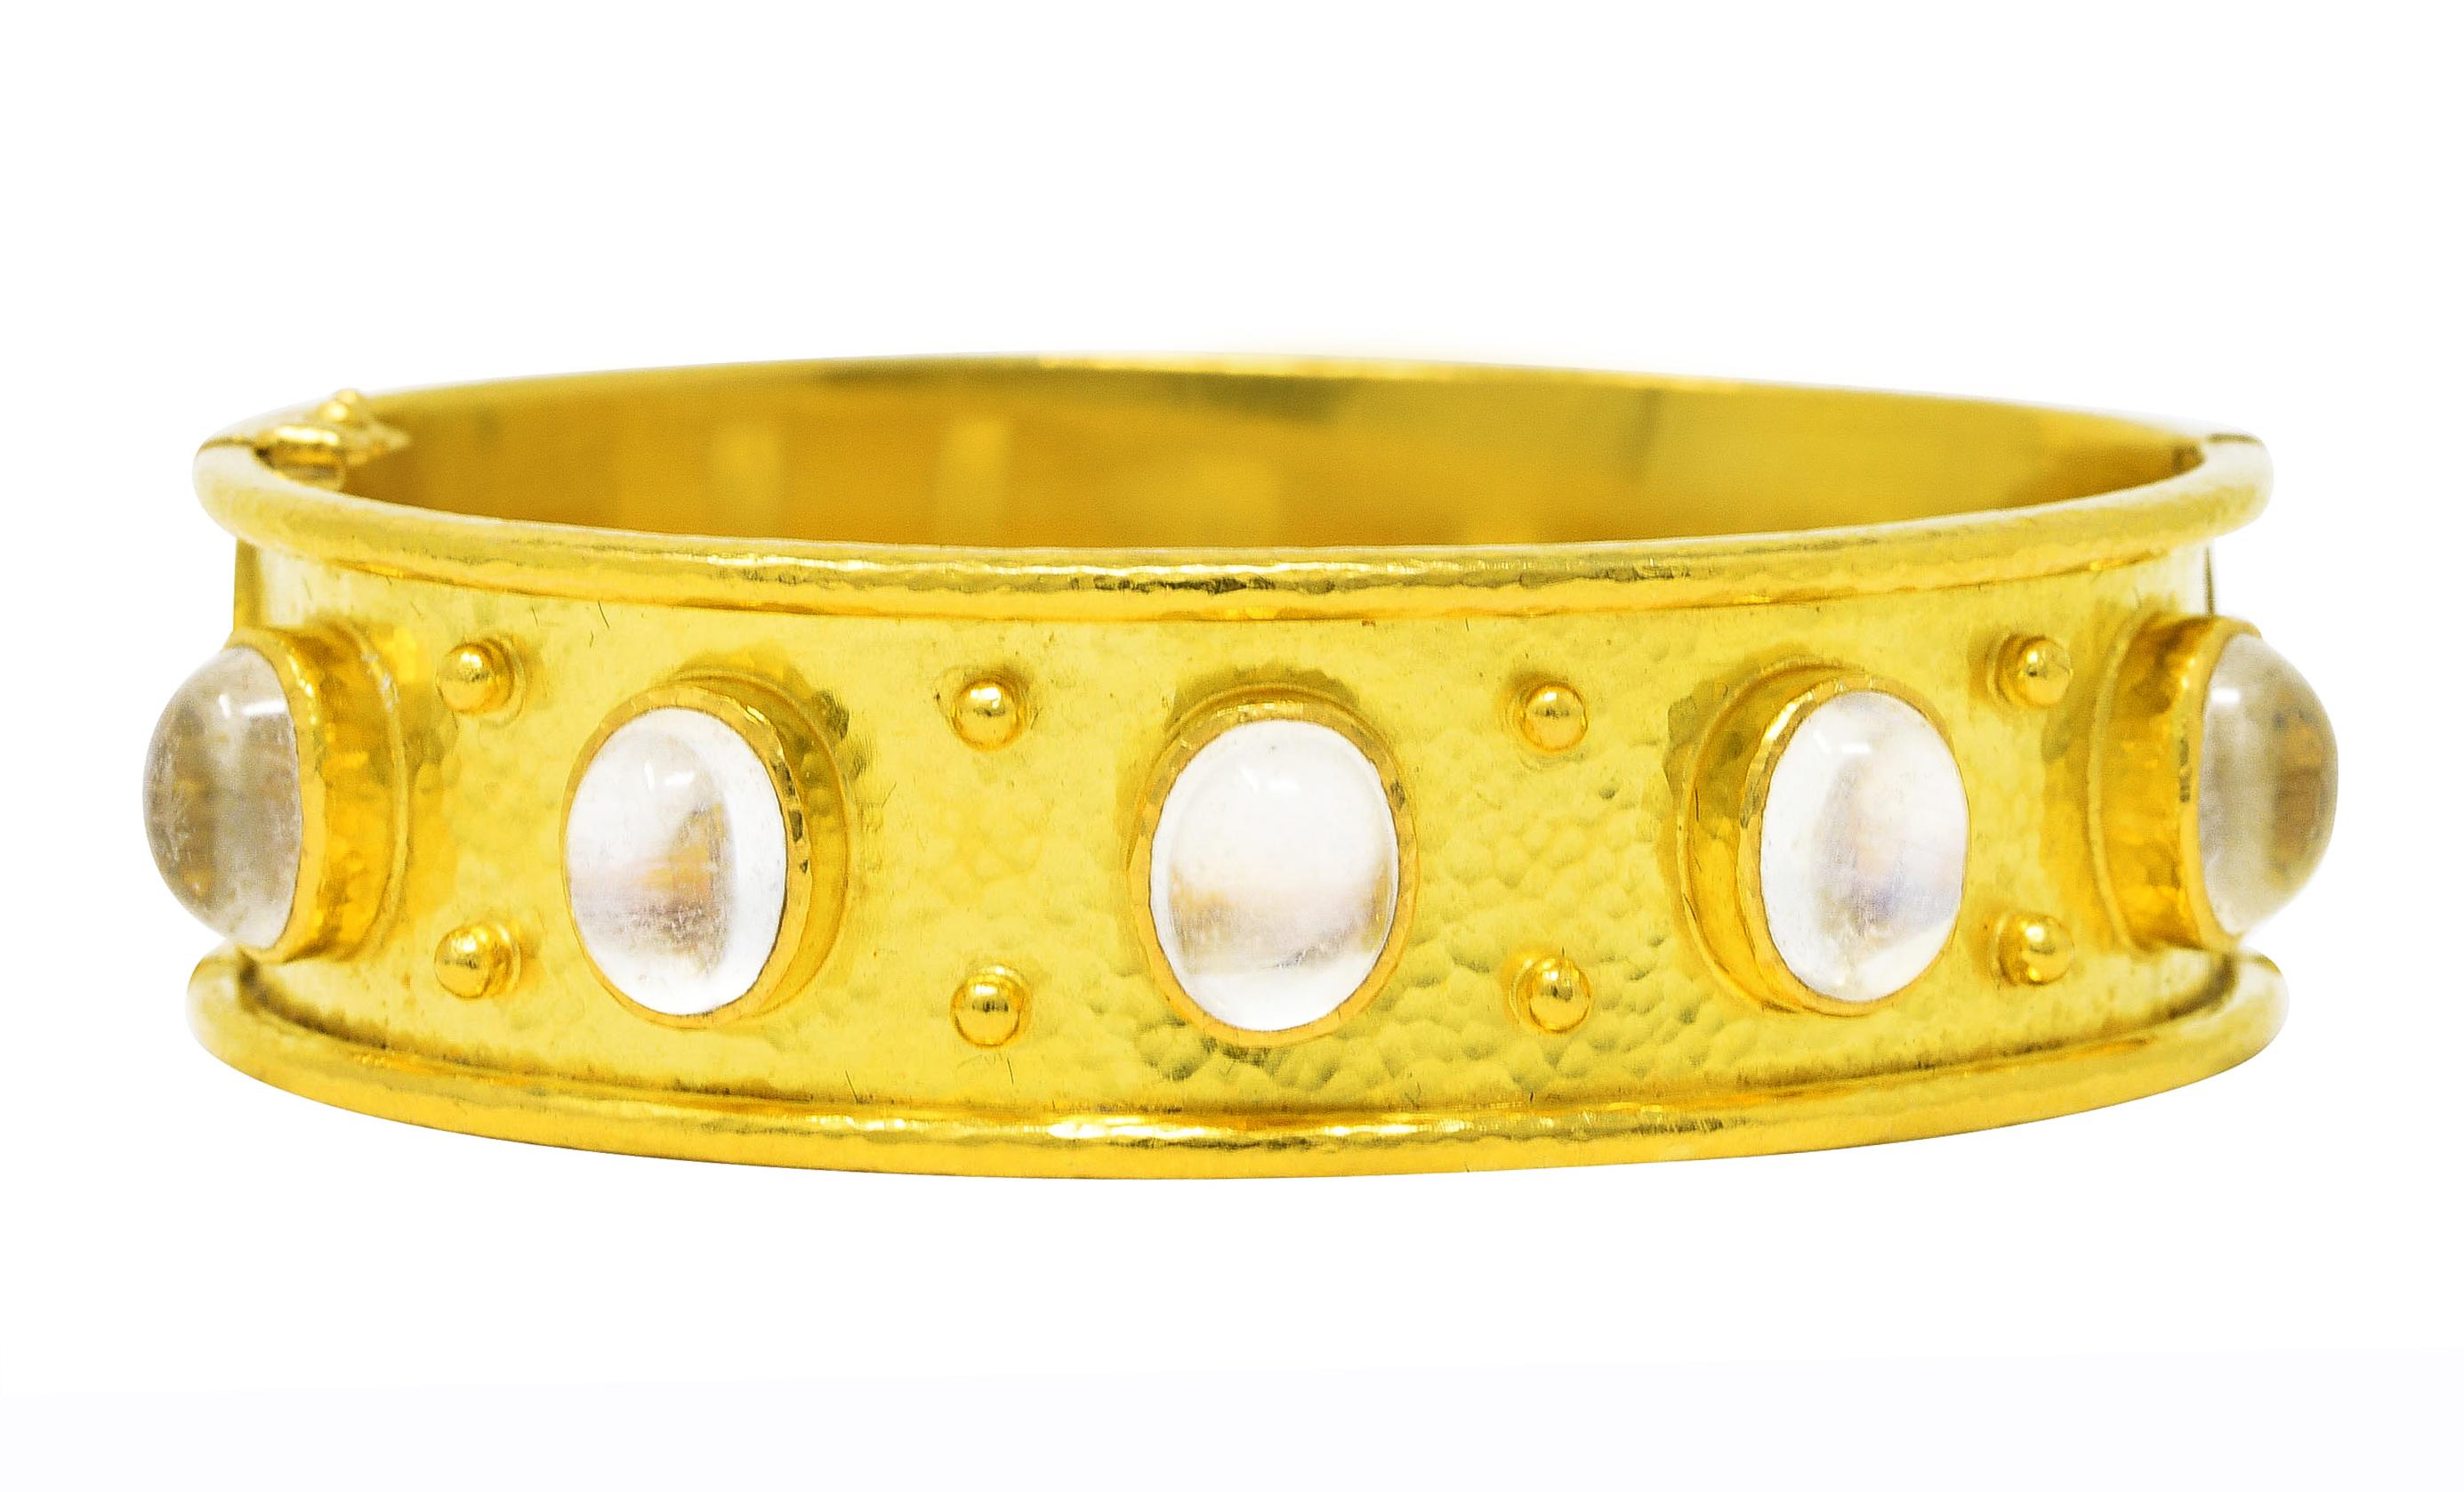 Bangle bracelet features five 6.5 x 8.5 mm oval moonstone cabochons - bezel set to front

Translucent white in body color with subtle blue adularescence

With fluted surround and accented by decorative gold beading

Accented by hammered gold texture